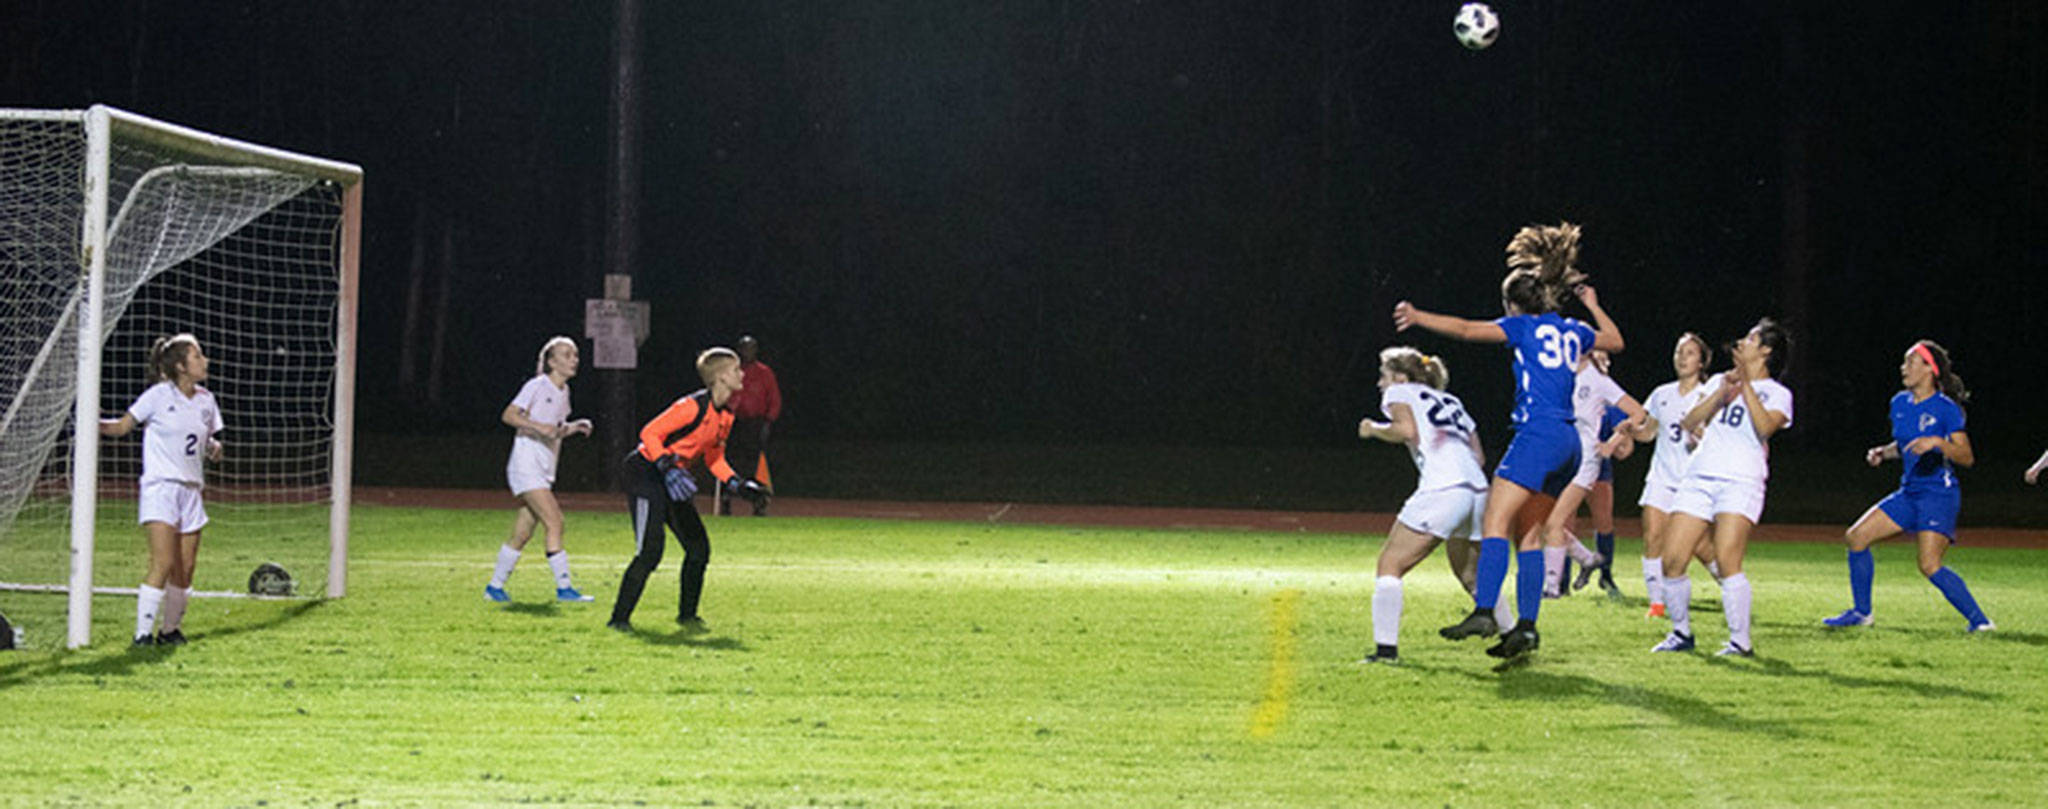 South Whidbey goes on the attack after a corner kick in the 4-0 win over Sultan Tuesday. (Photo by Paul Lien)